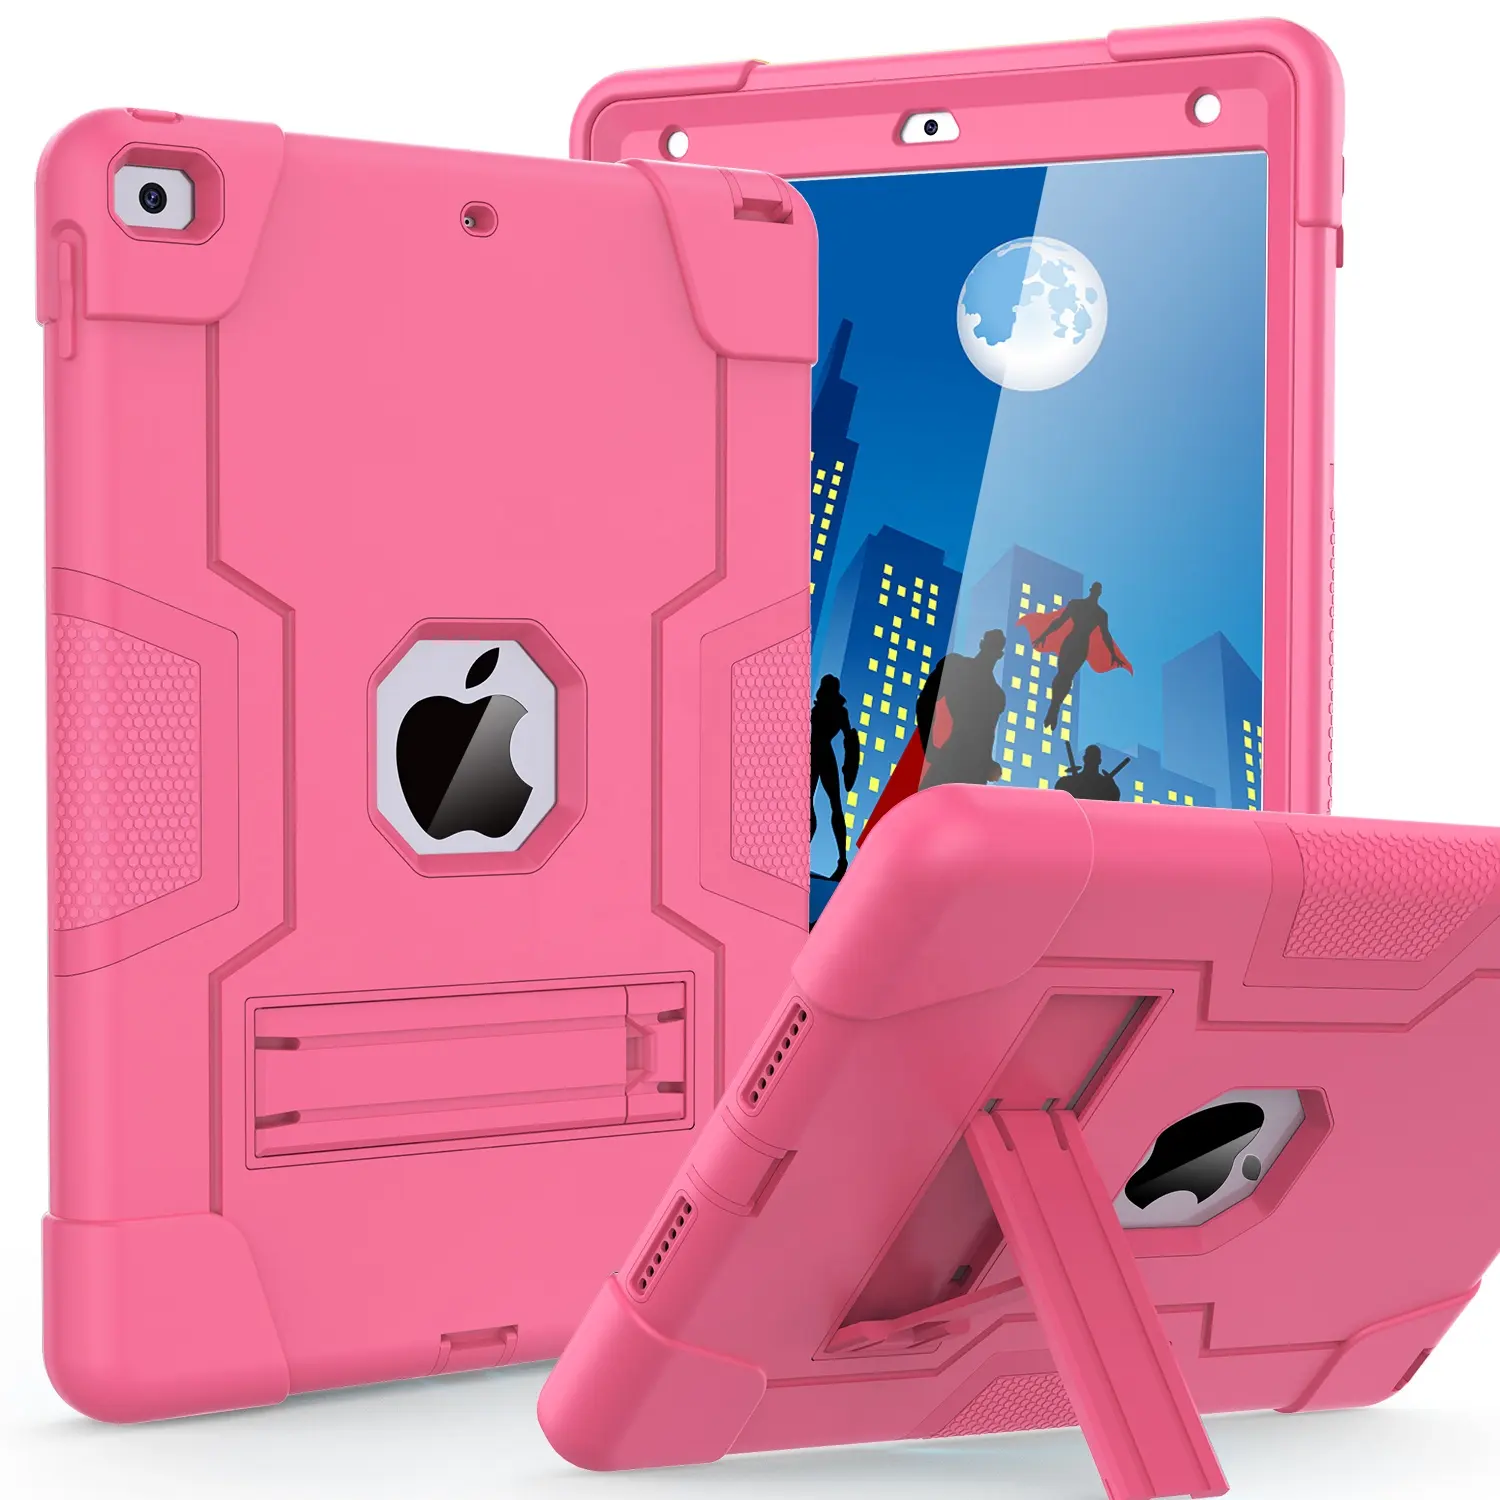 Para Apple iPad 102 Case 3 em 1 Silicone Hard PC Shocokproof Rugged Tablet Case Para iPad 9th Gen 10.2 inch Case Cover 2021